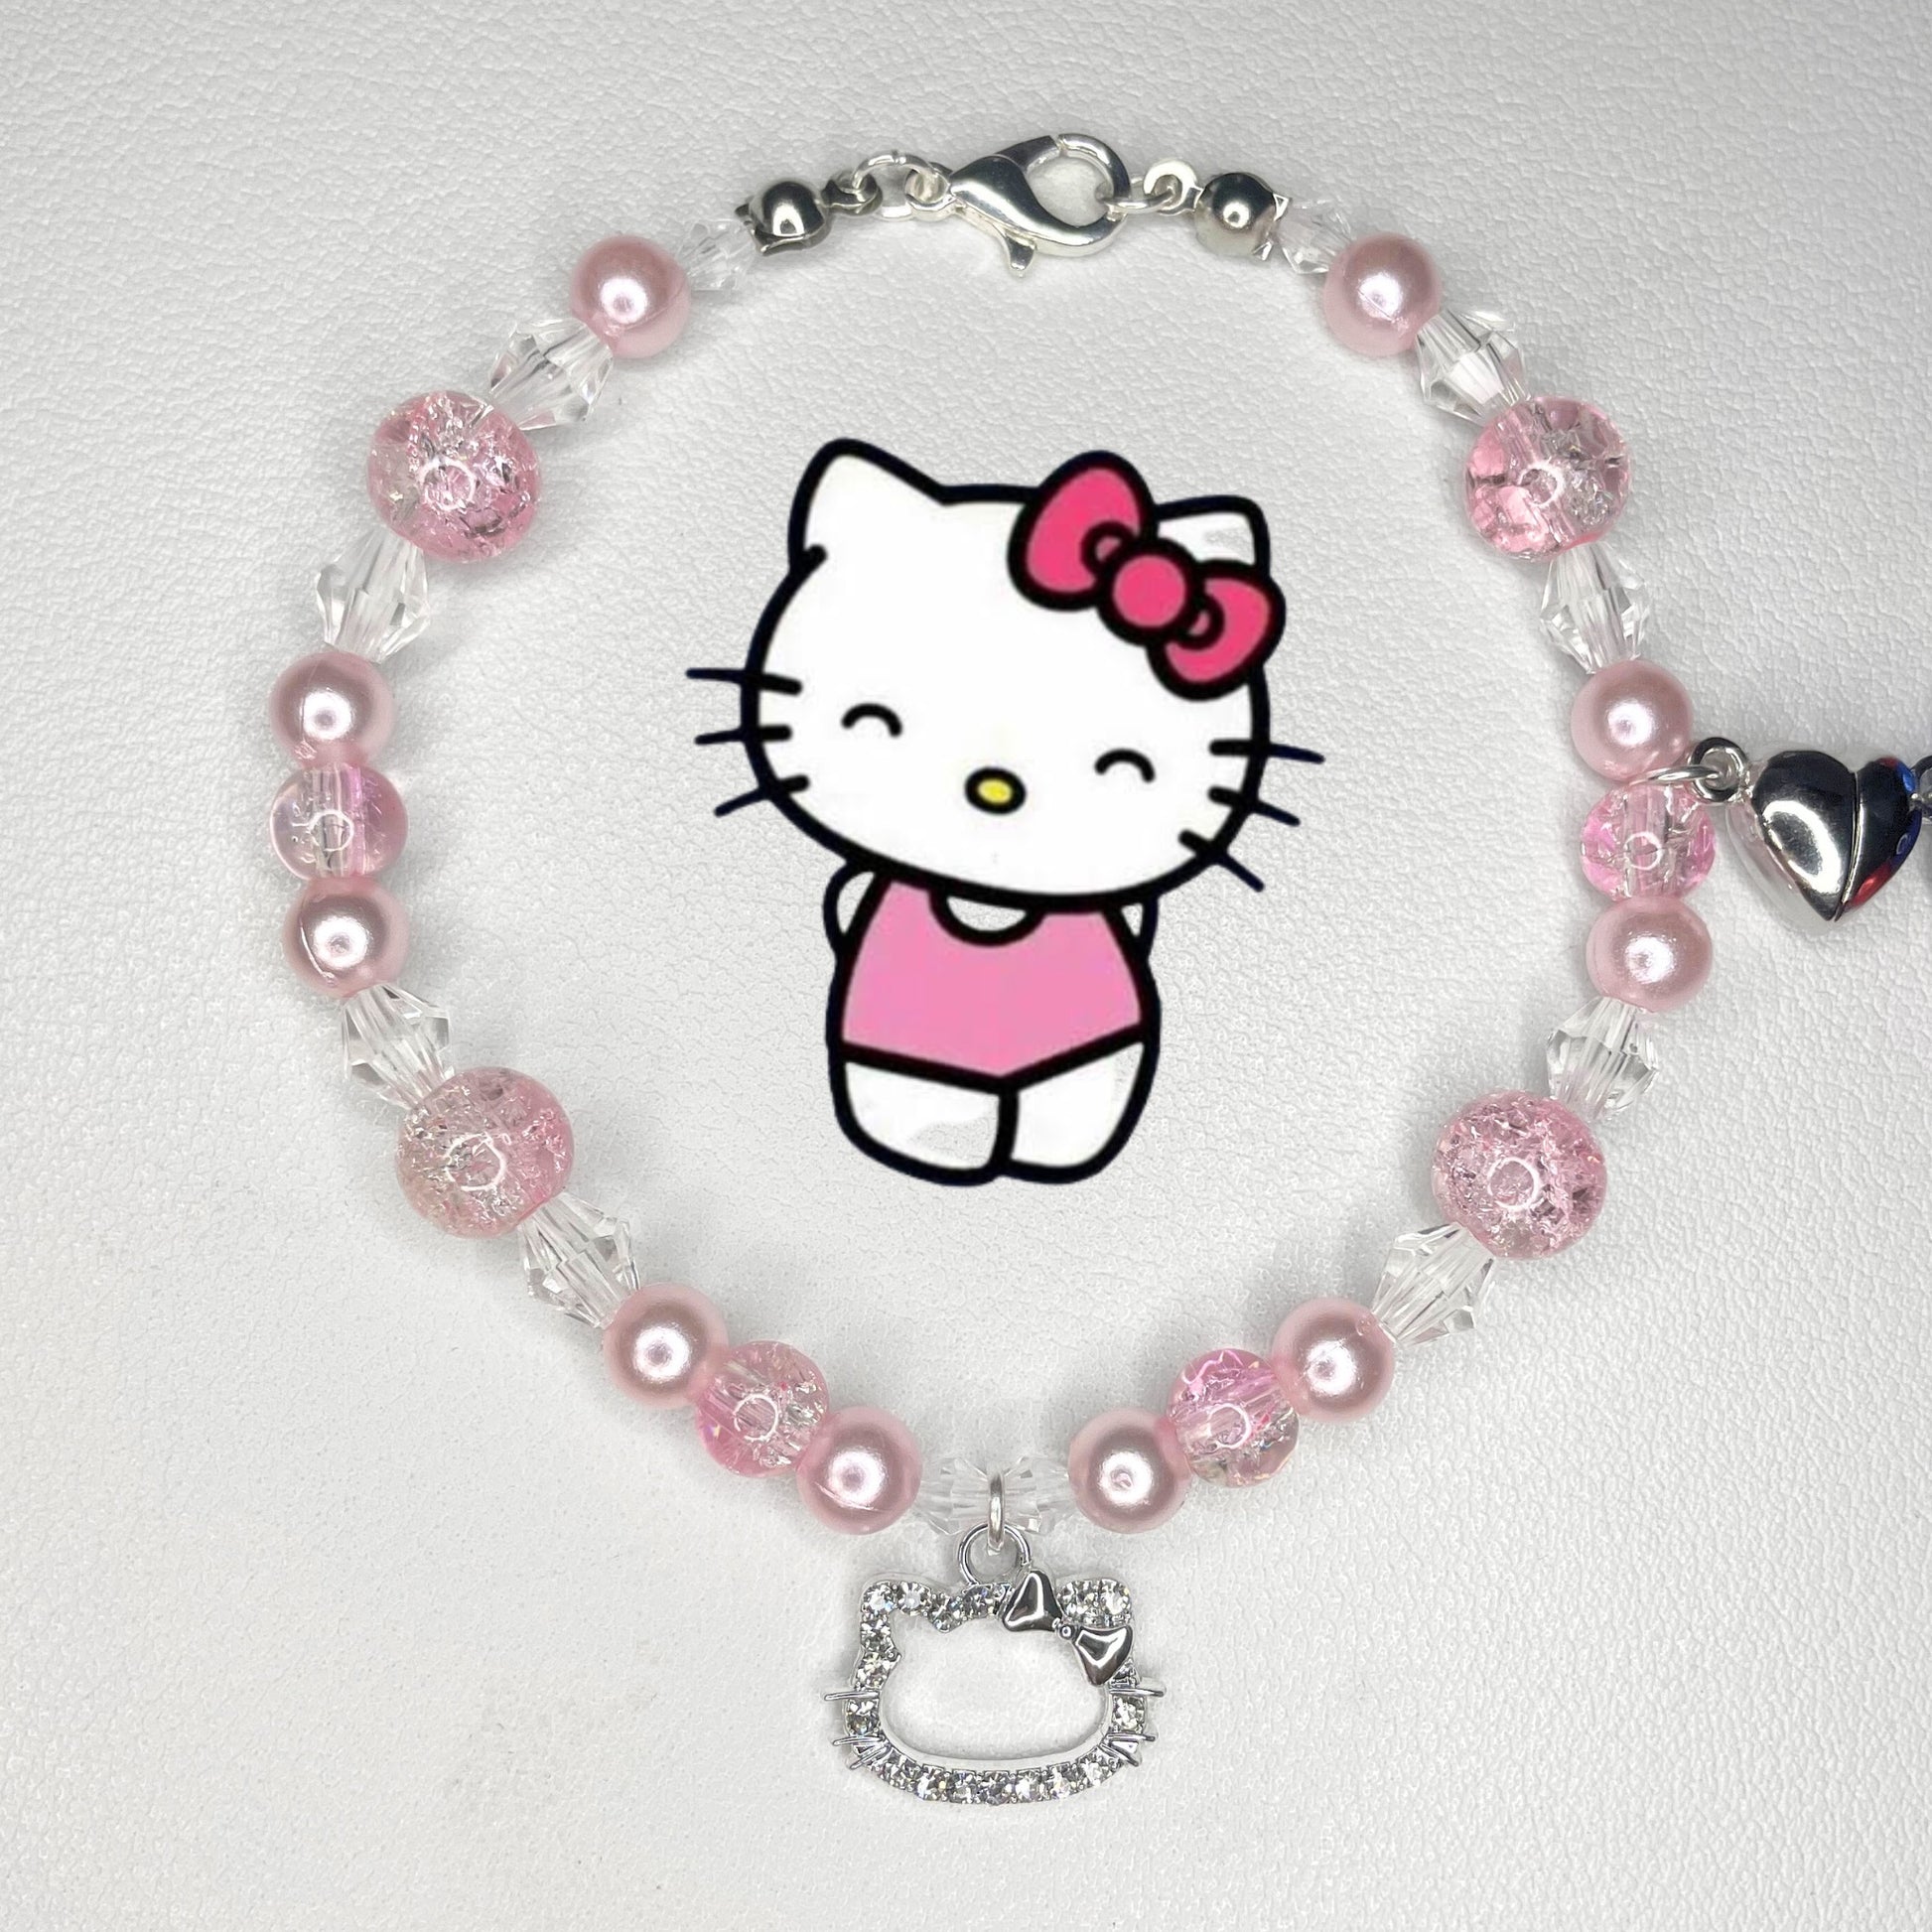 Hello Kitty & Spider-man bracelets available in the link in our